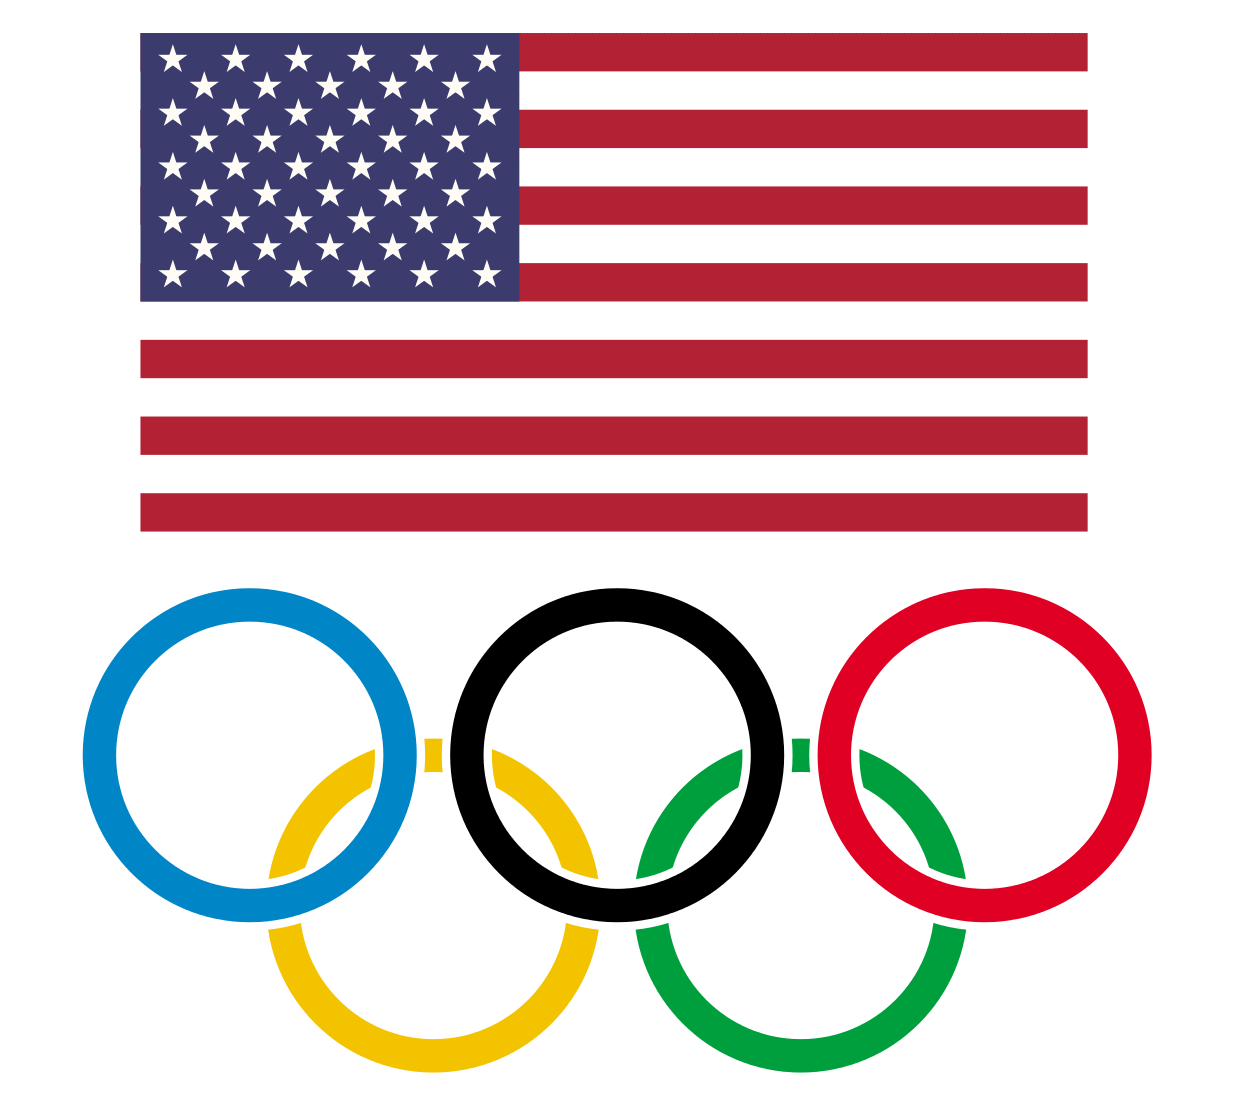 USA flag with rings